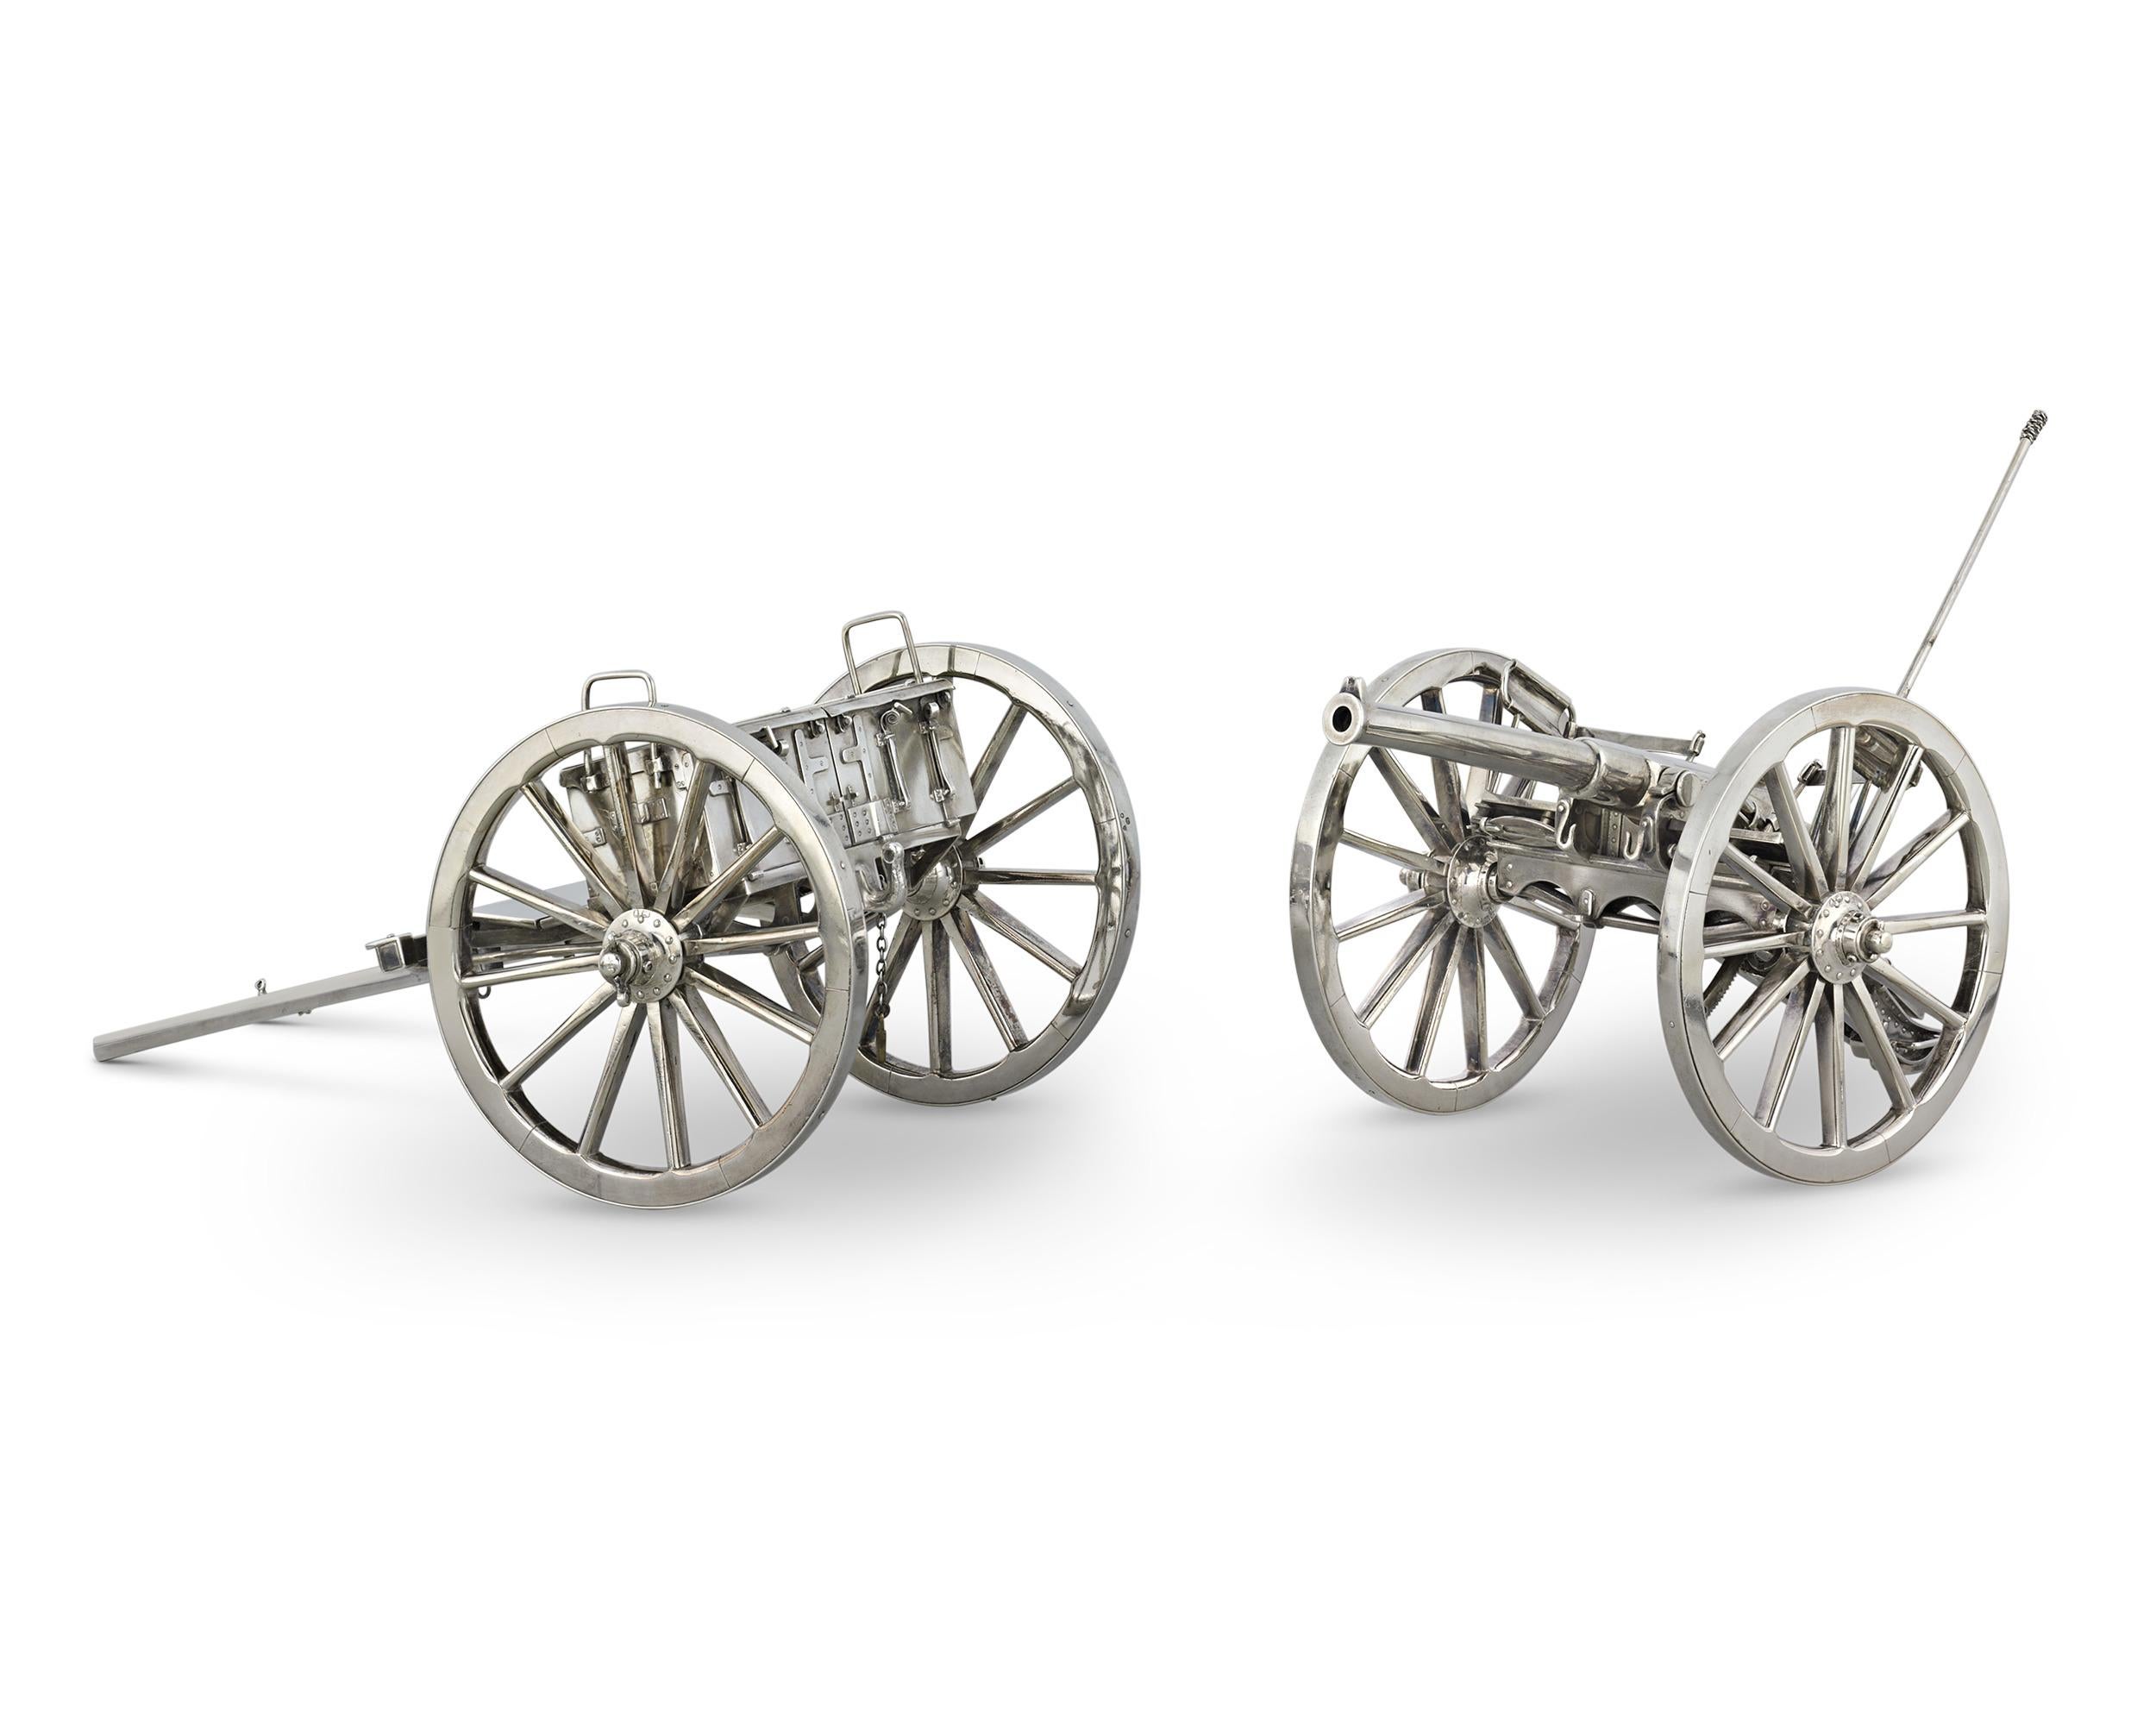 Ideal for both cigar aficionados and military enthusiasts, this Late Victorian silver cannon and carriage table lighter showcases four fully functional wheels, allowing it to be effortlessly rolled to guests across a table. At the turn of the